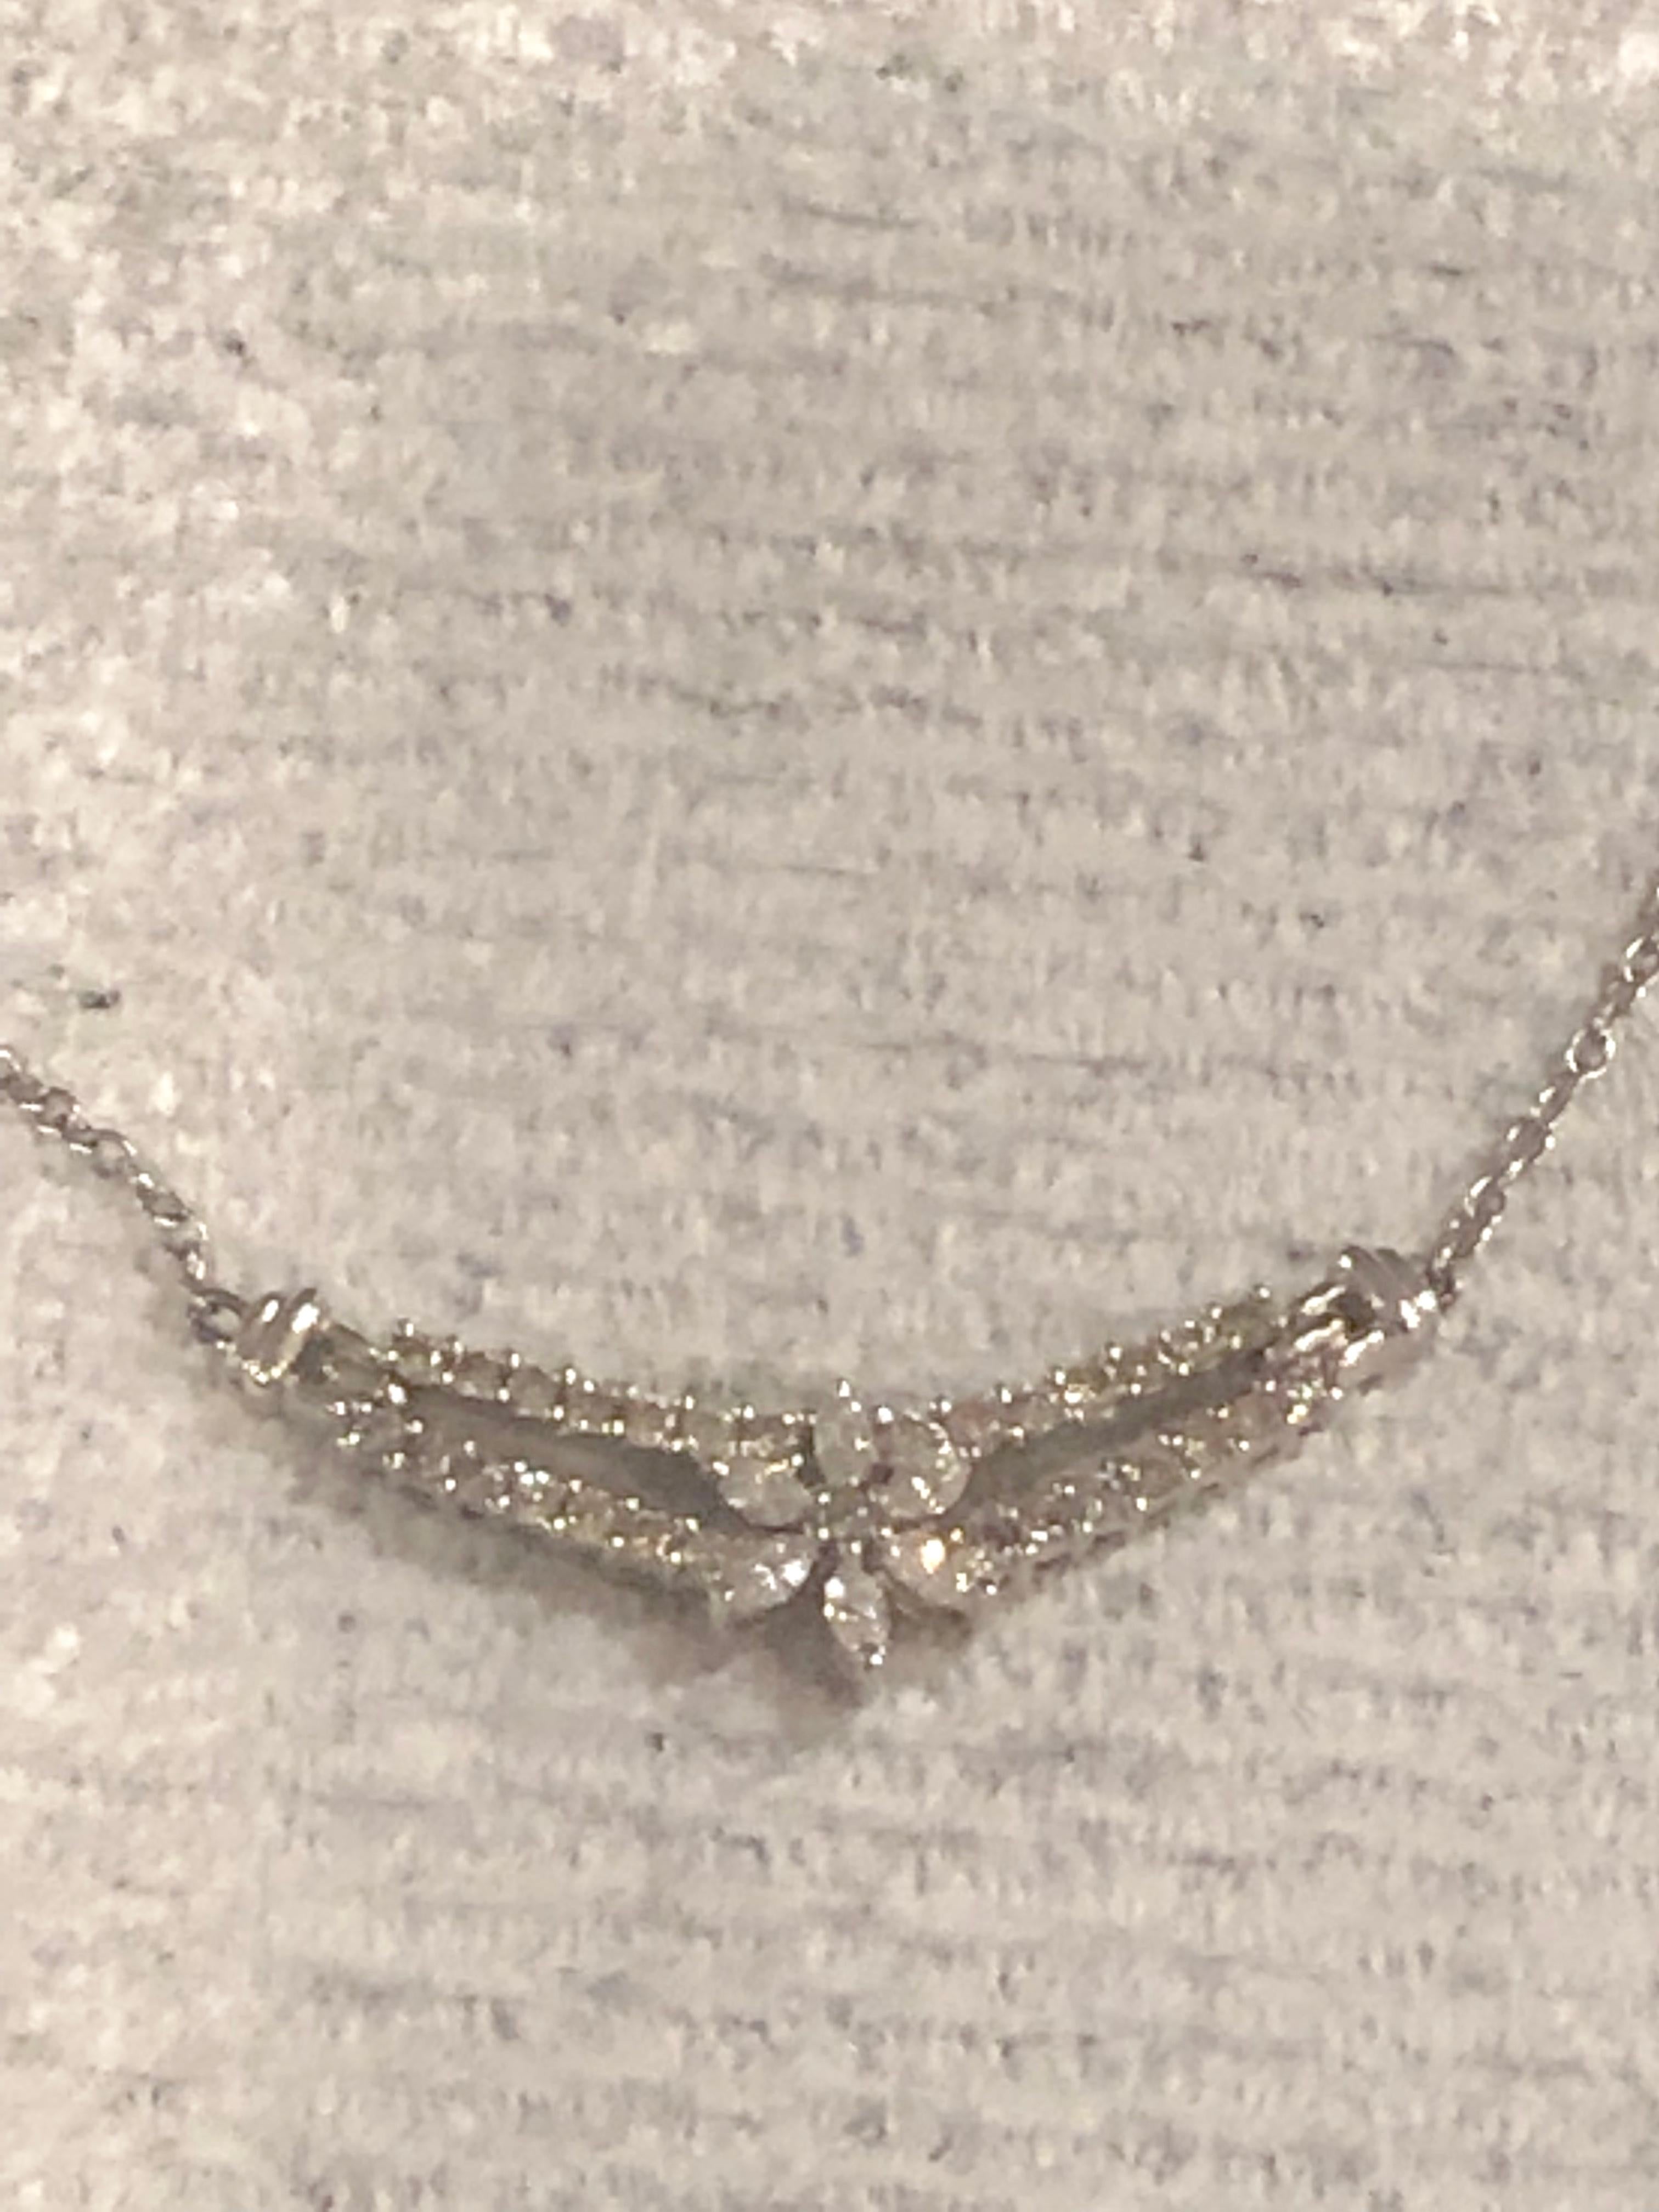 18 Karat White Gold And Diamond Soldered Pendent Necklace 
16 Inches
With 29 diamonds at 1.50 Total Round Diamonds and 6 diamonds at .50 total Marquise Diamonds
2.00 TDW
6.35 Grams total weight